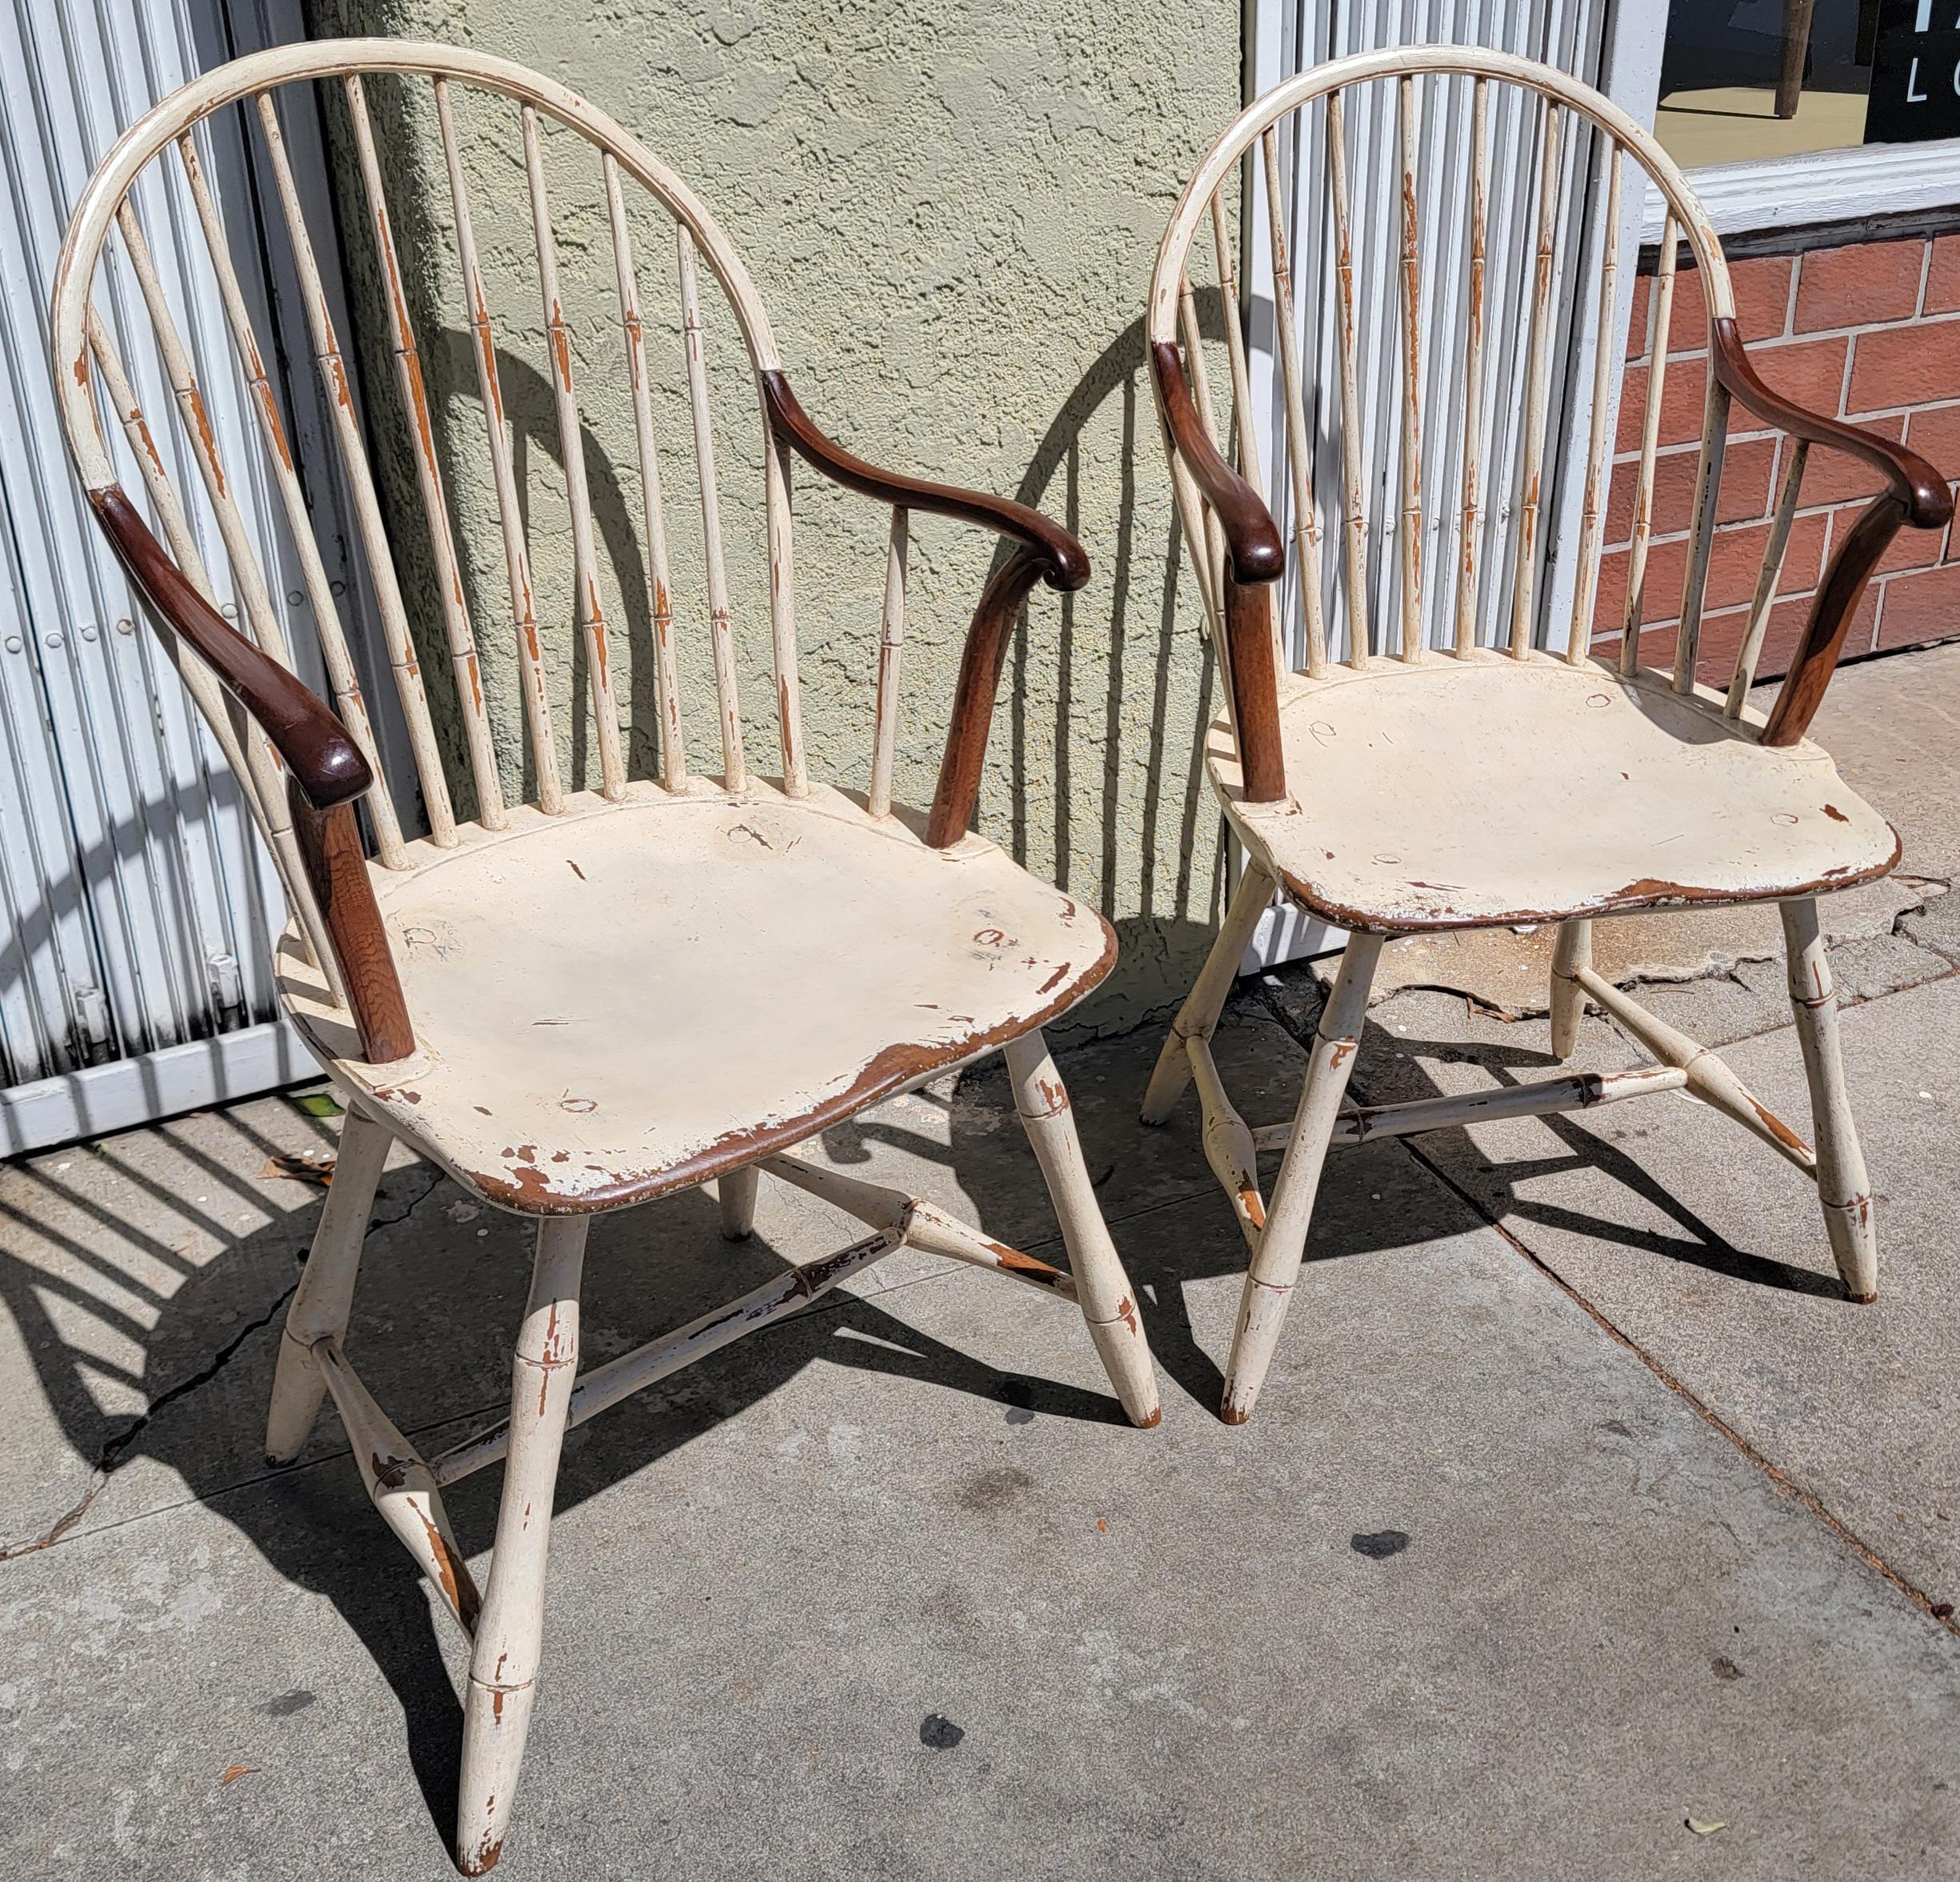 19th C extended arm Windsor chairs in a white painted surface from Philadelphia and in fine condition.These chairs are so comfortable and sturdy.Sold as a pair only.